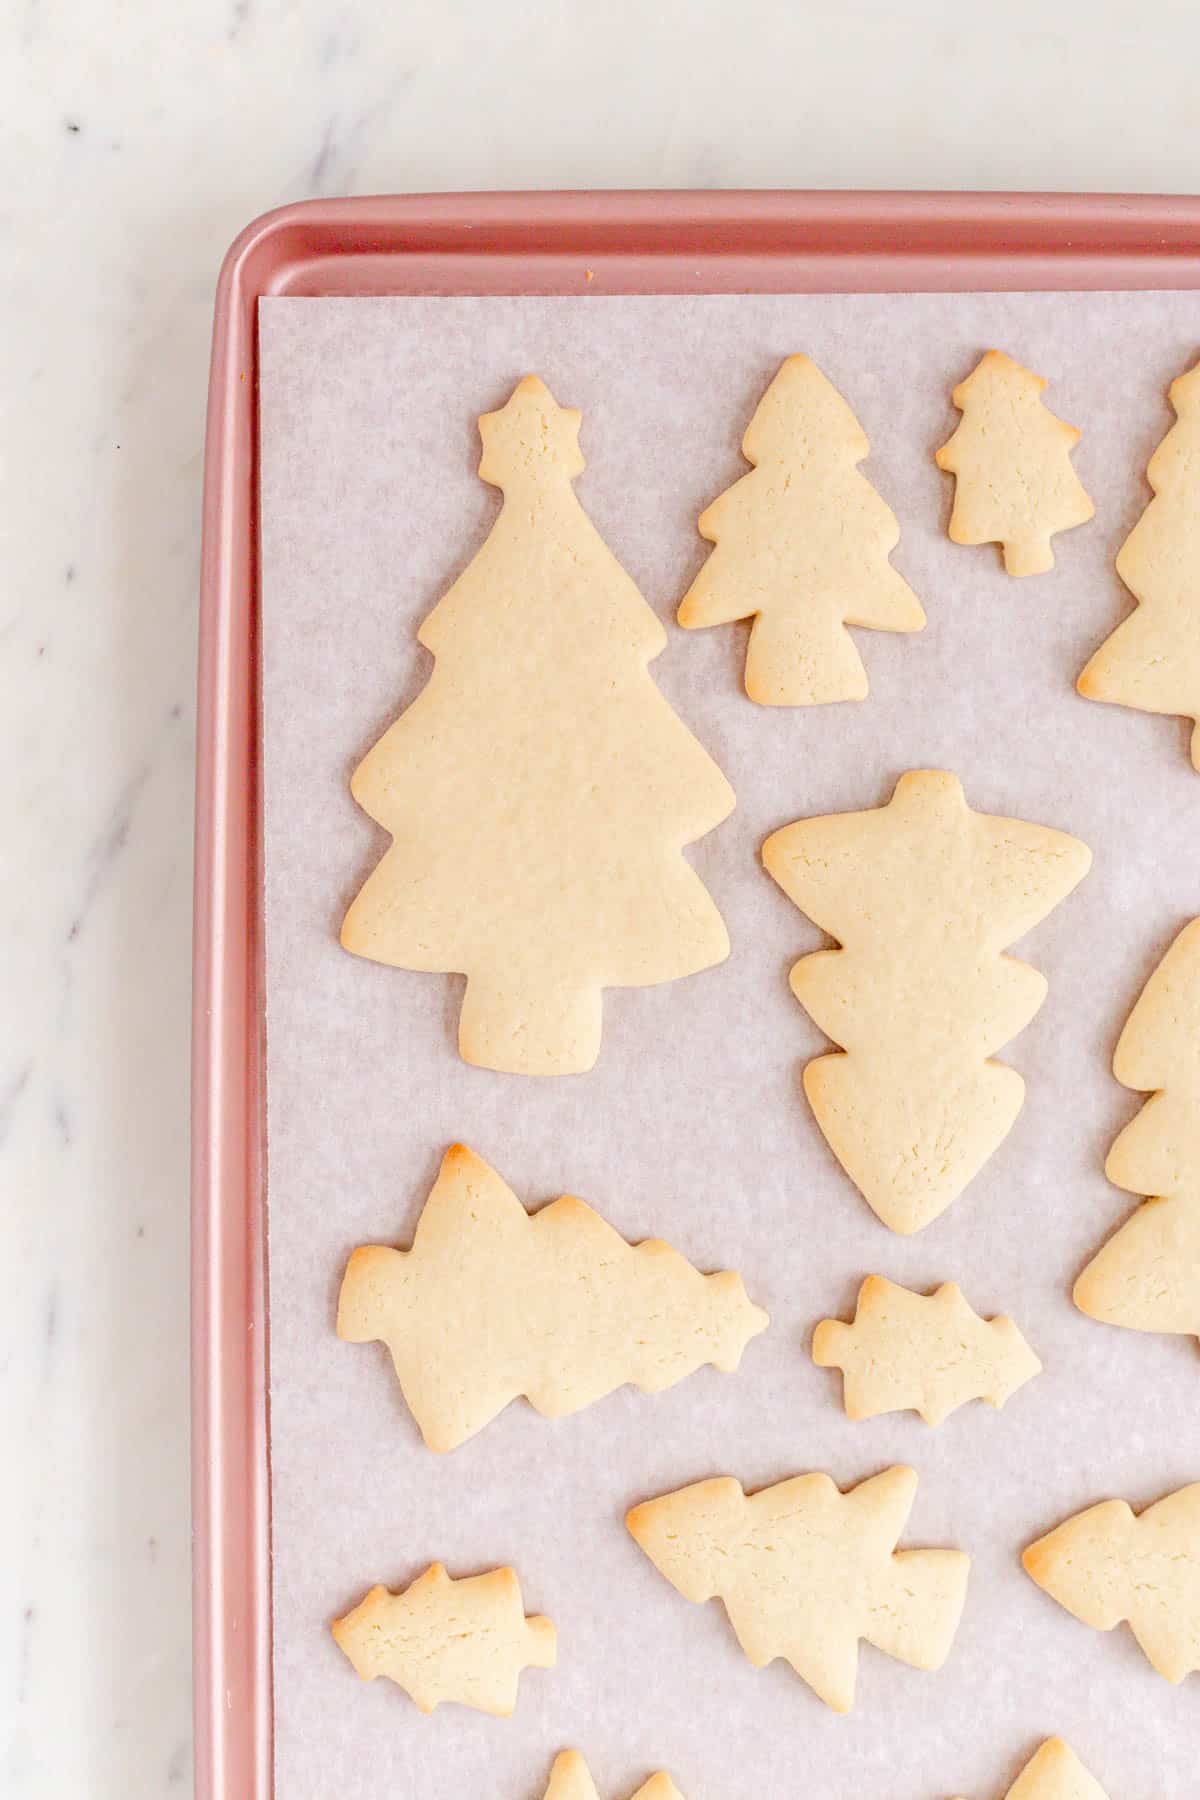 Baked Christmas tree sugar cookies on parchment on a pink baking sheet